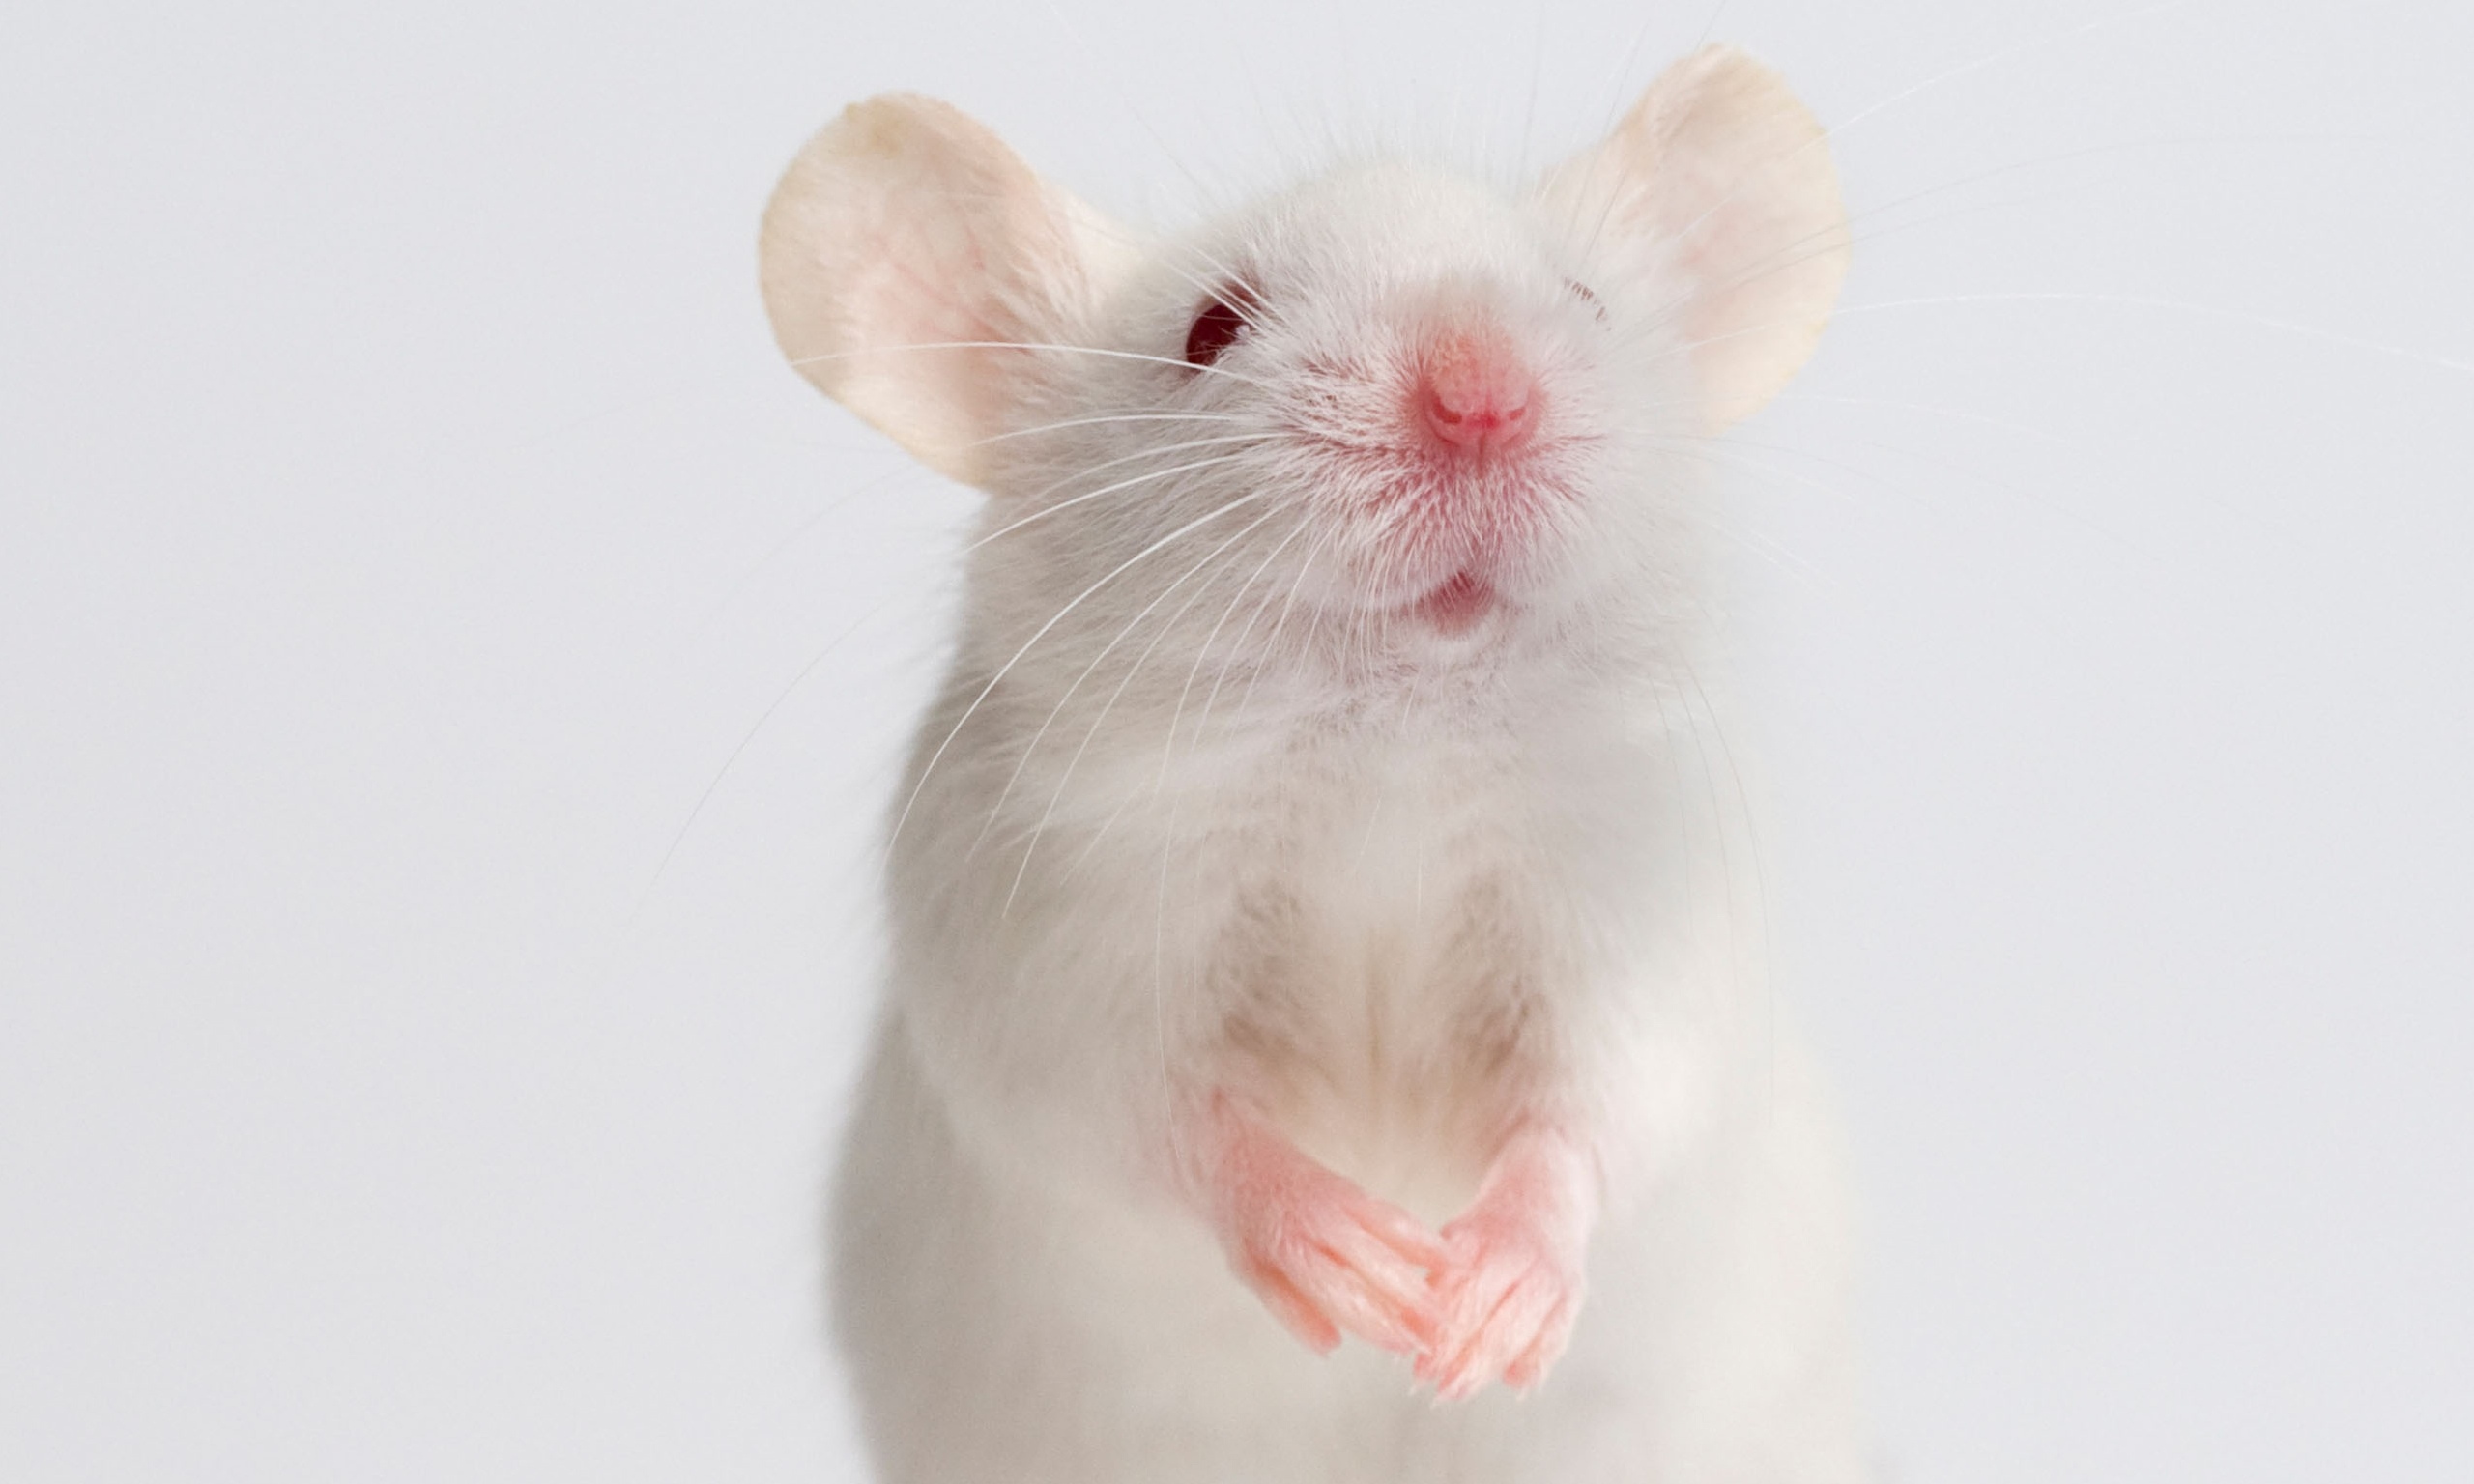 white mouse - Google Search | VRI Mice | Pinterest | Mice and ...